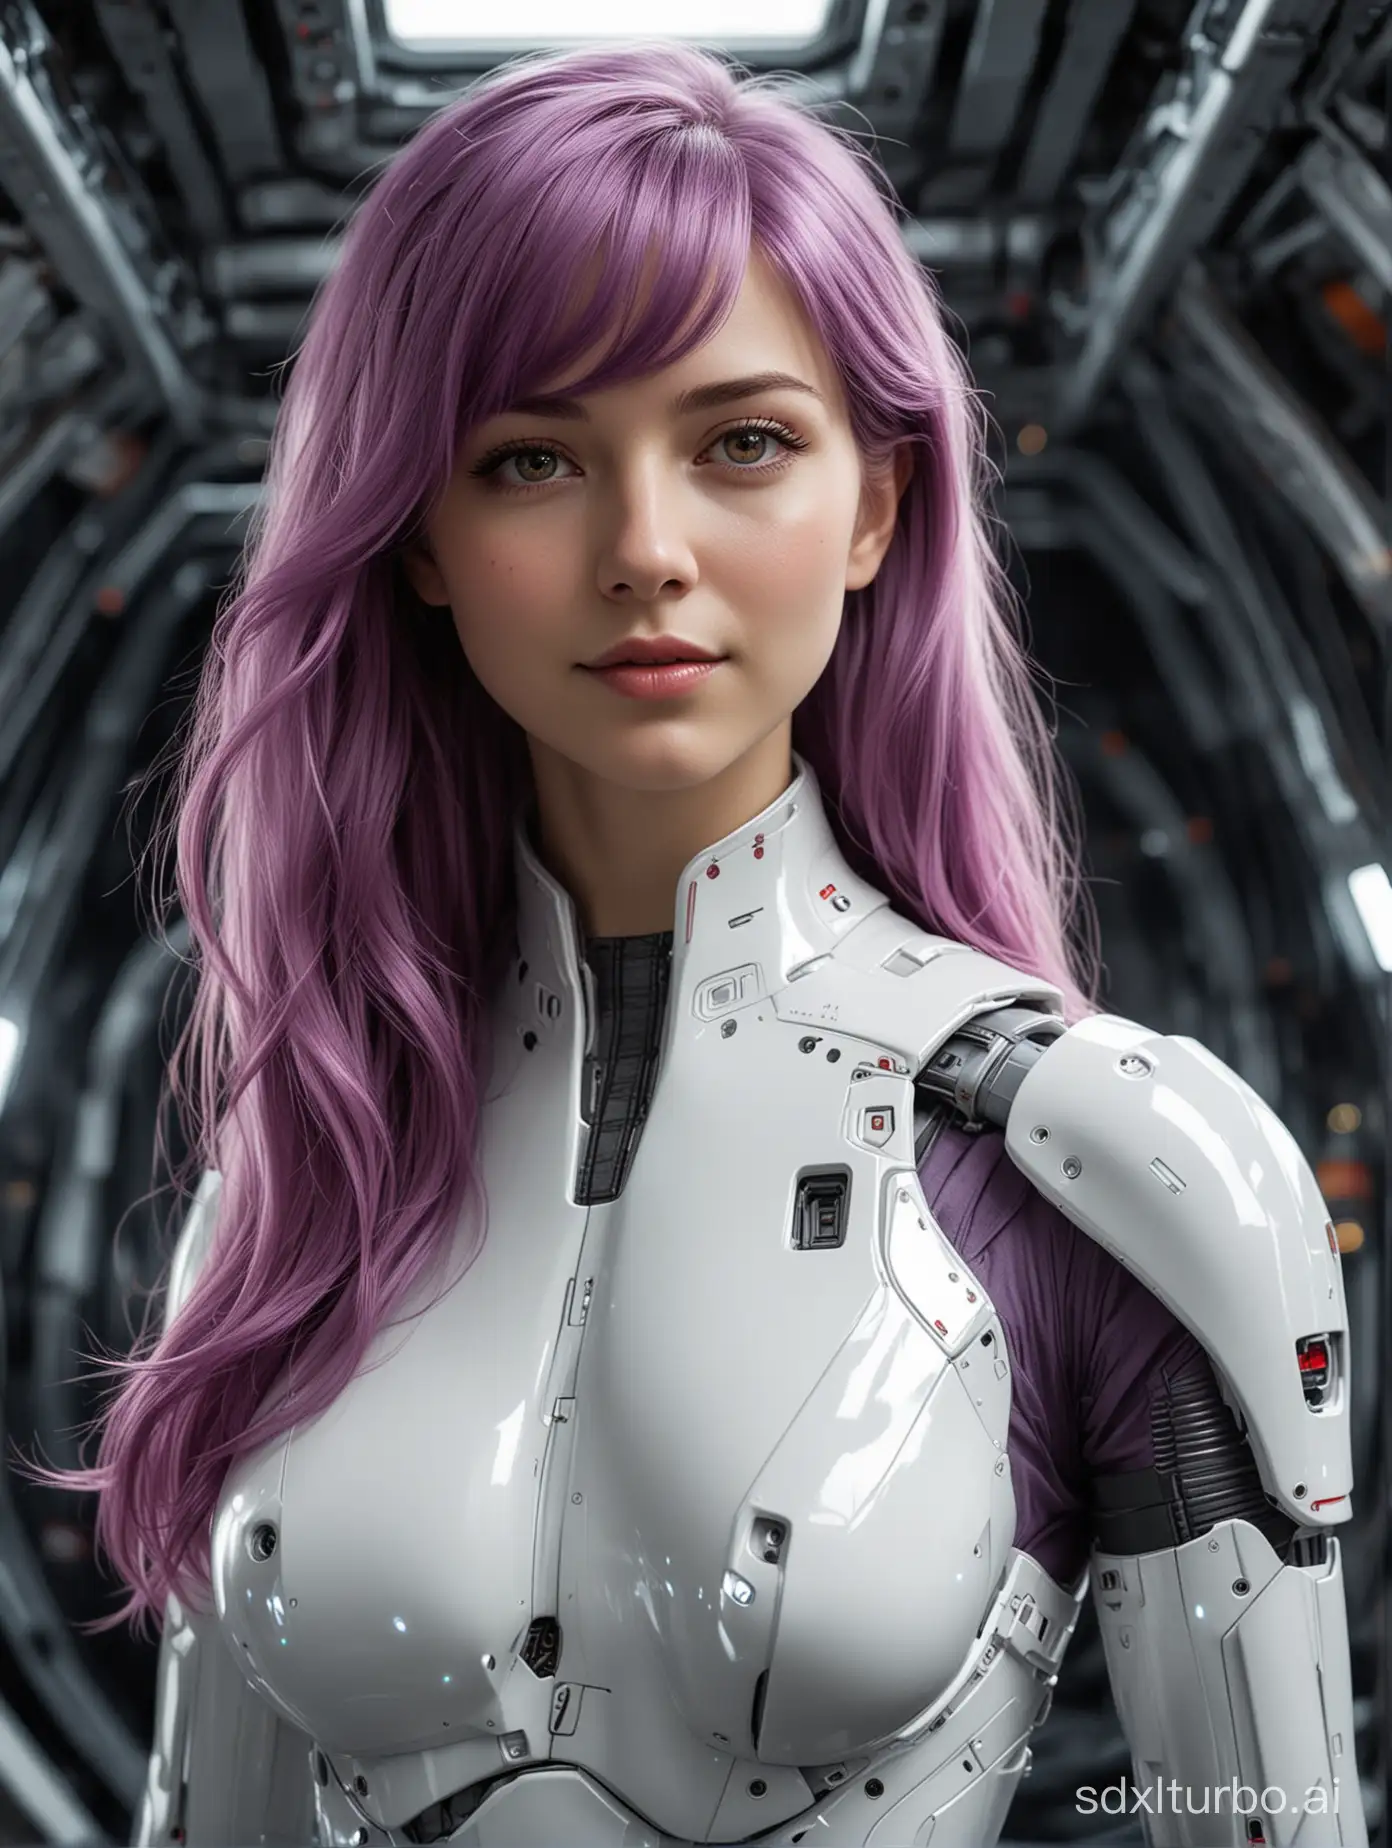  In the vast expanse of deep space, aboard a formidable warship, a petite android stands upon the deck, her figure a mesmerizing blend of sleek machinery and graceful femininity. From the neck down, she is predominantly mechanical, her form encased in white plasteel armor with striking red accents emitting a subtle glow, seamlessly integrating with her human-like features.

Long silky mauve hair cascades down the length of her back, stylish bangs framing her youthful, yet remarkably detailed, android face. With delicate sensors mimicking human expressions, she wears a wide grin as she gazes out into the infinite abyss beyond the viewport.

Her eyes, a captivating shade of purple, gleam with a hint of artificial luminescence, reflecting the distant stars that dot the cosmos. In this moment, she is the embodiment of freedom, a testament to the boundless possibilities that await those who dare to explore the depths of space and the uncharted territories that lie beyond."